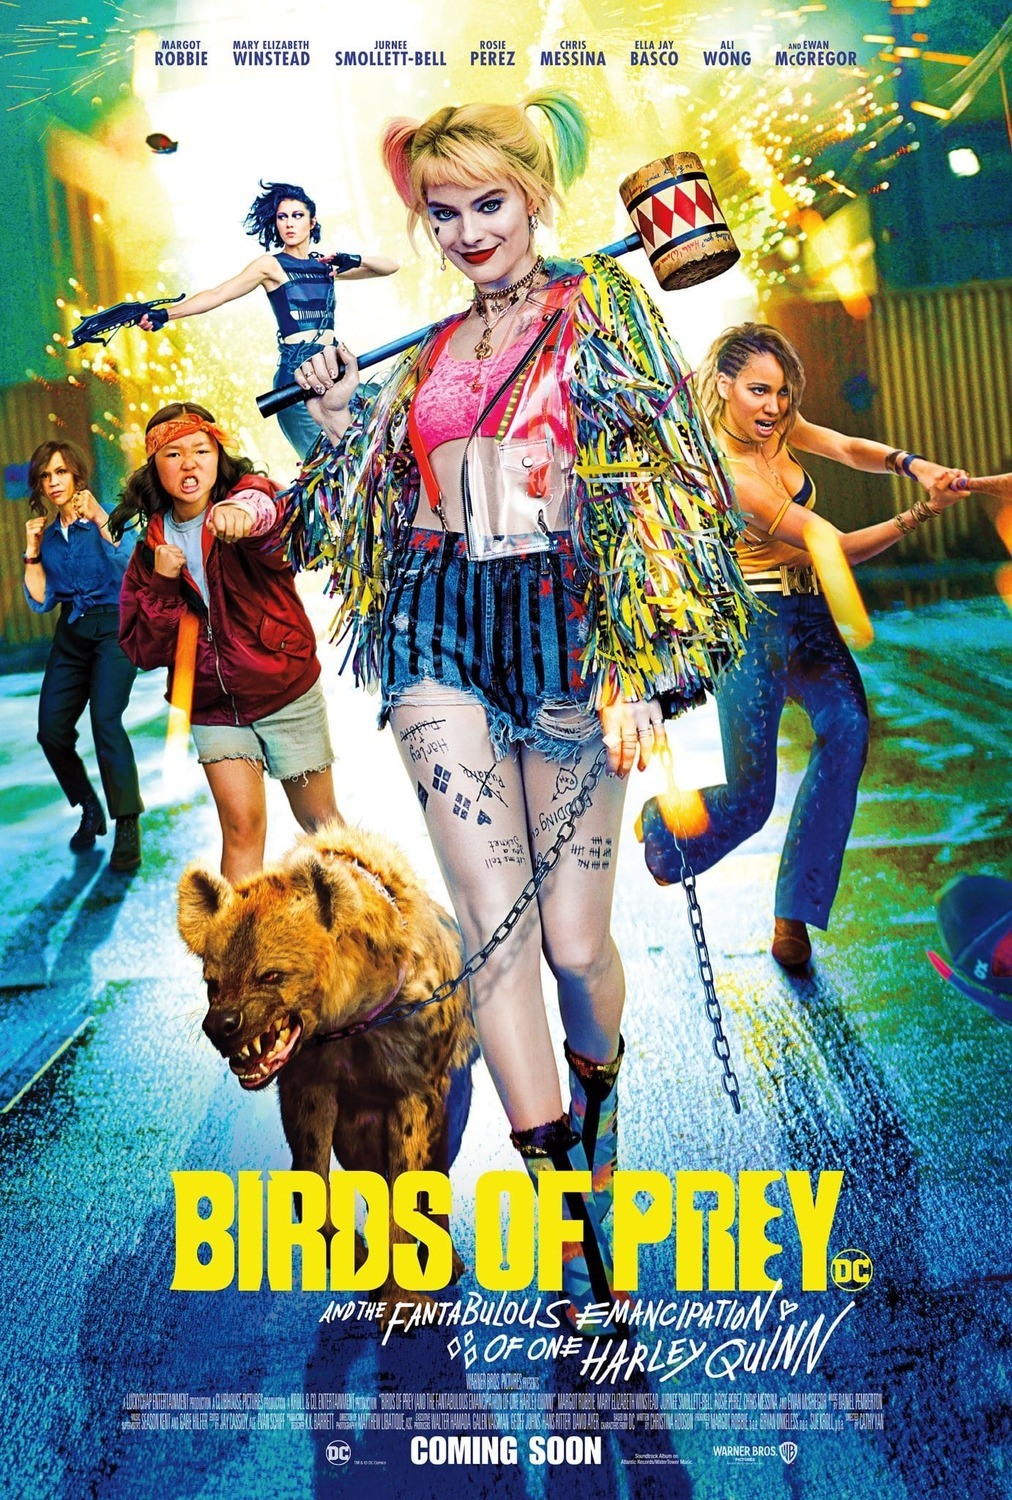 Prepare to be boggled and bored by 'Birds of Prey' – The Connector